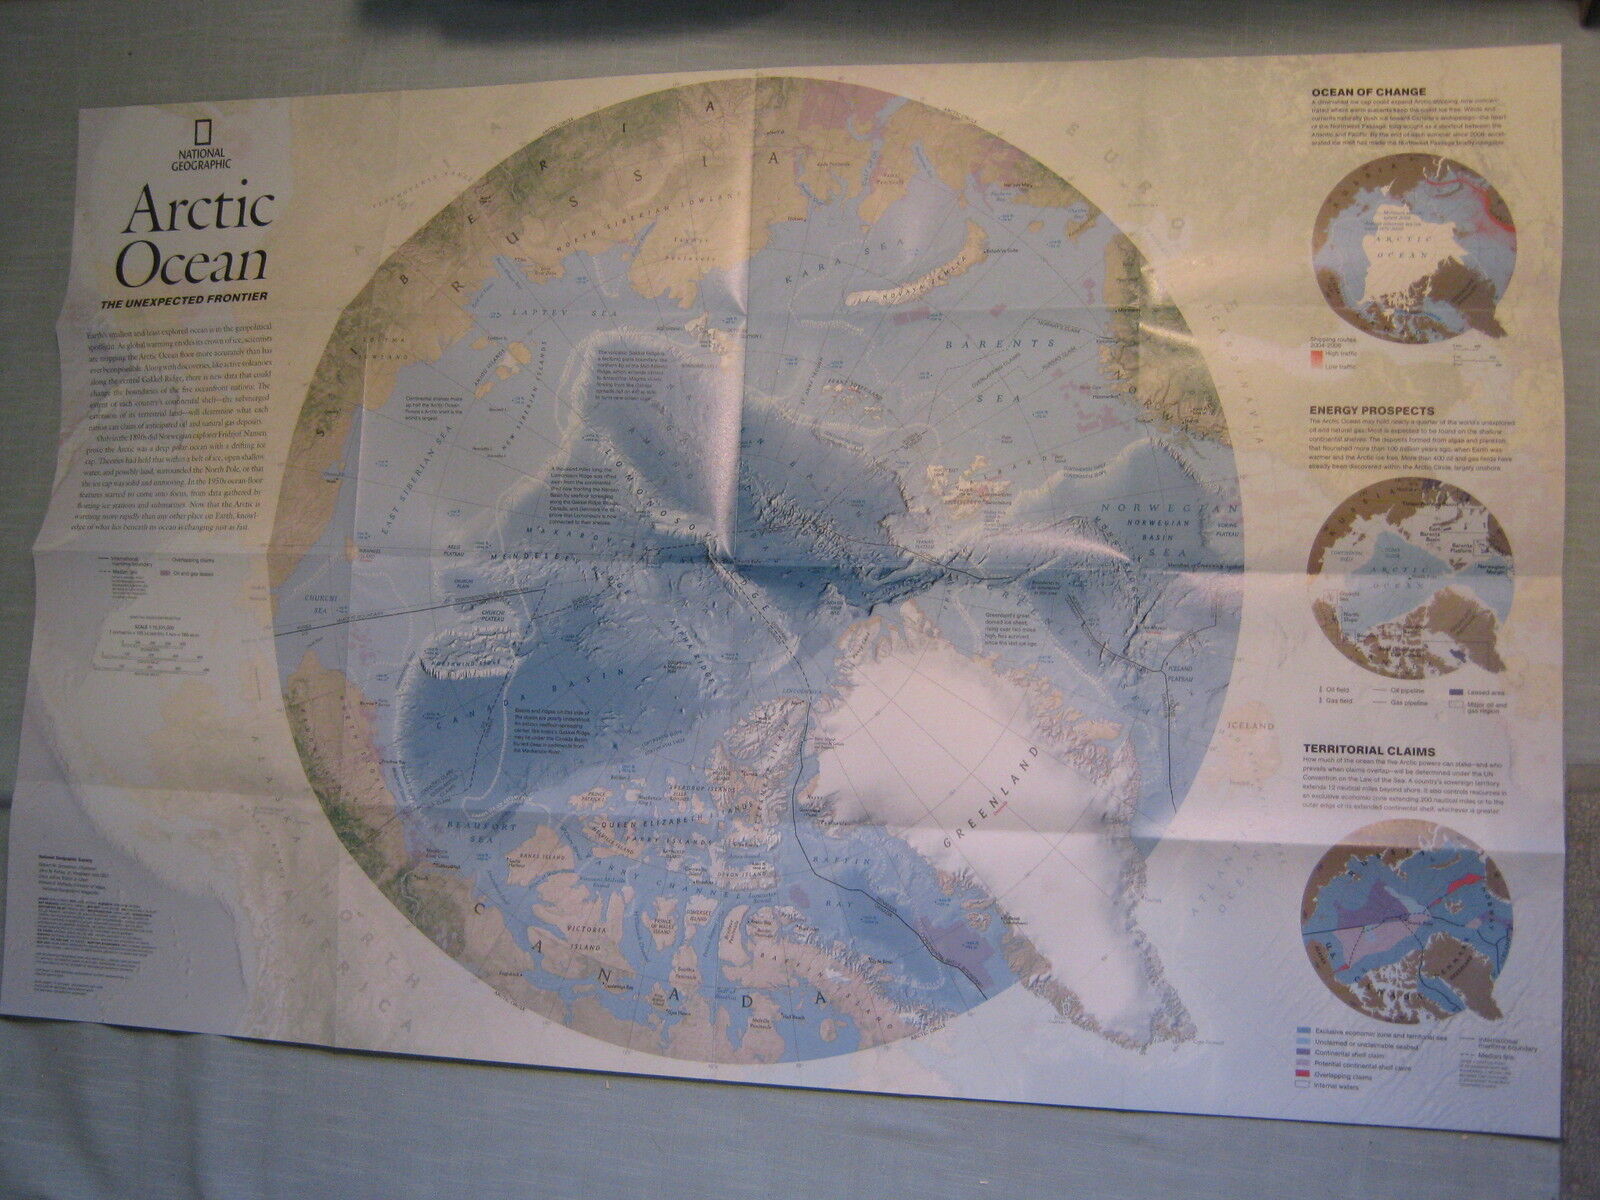 ARCTIC OCEAN MAP +TWILIGHT OF ARCTIC ICE National Geographic May 2009